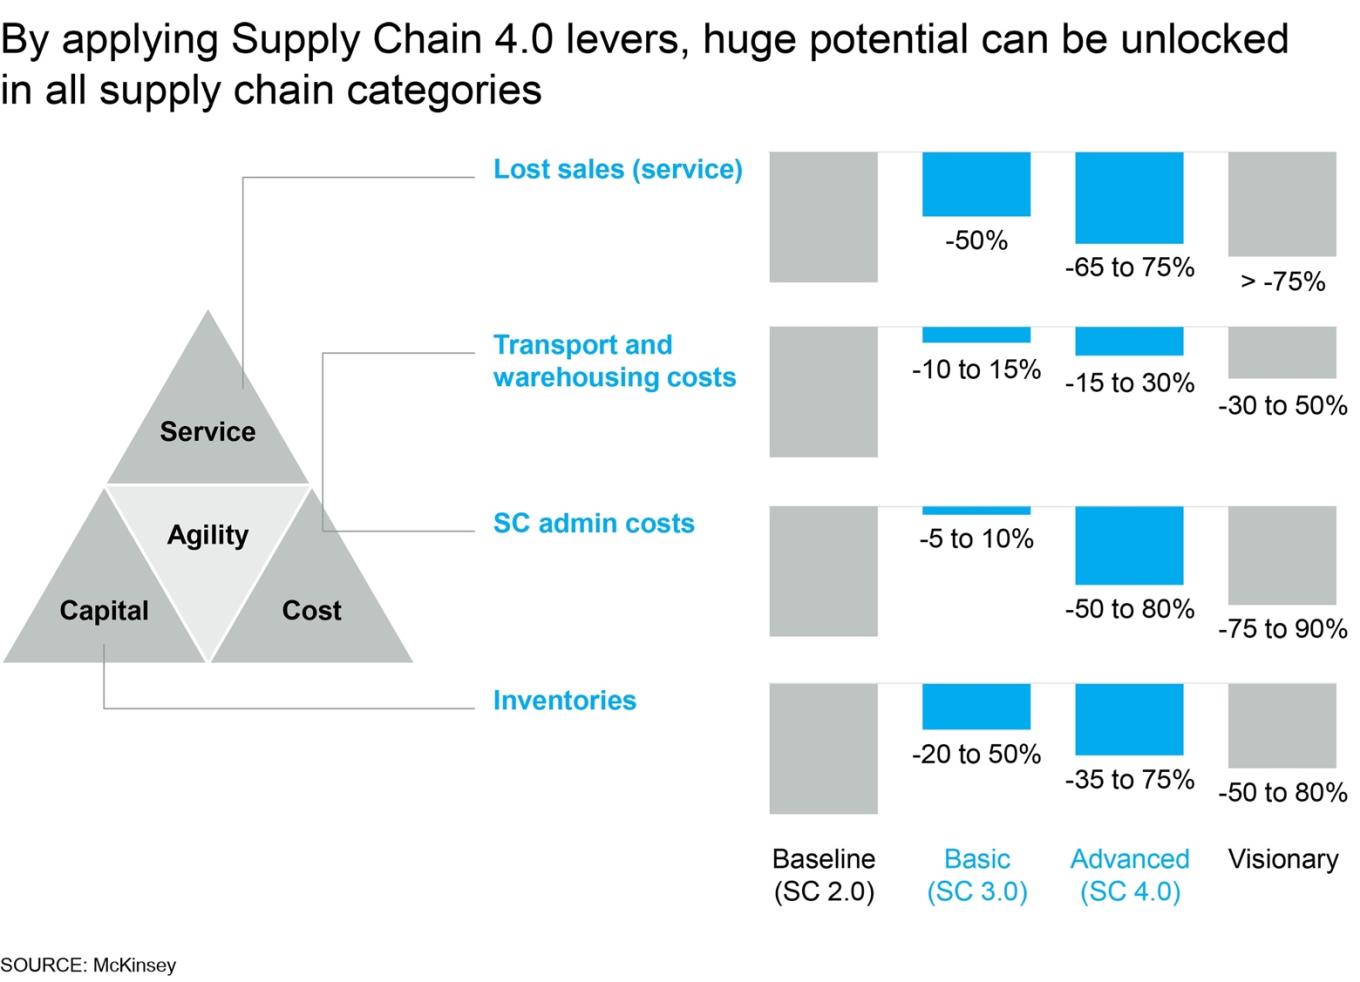 potential of supply chain 4.0